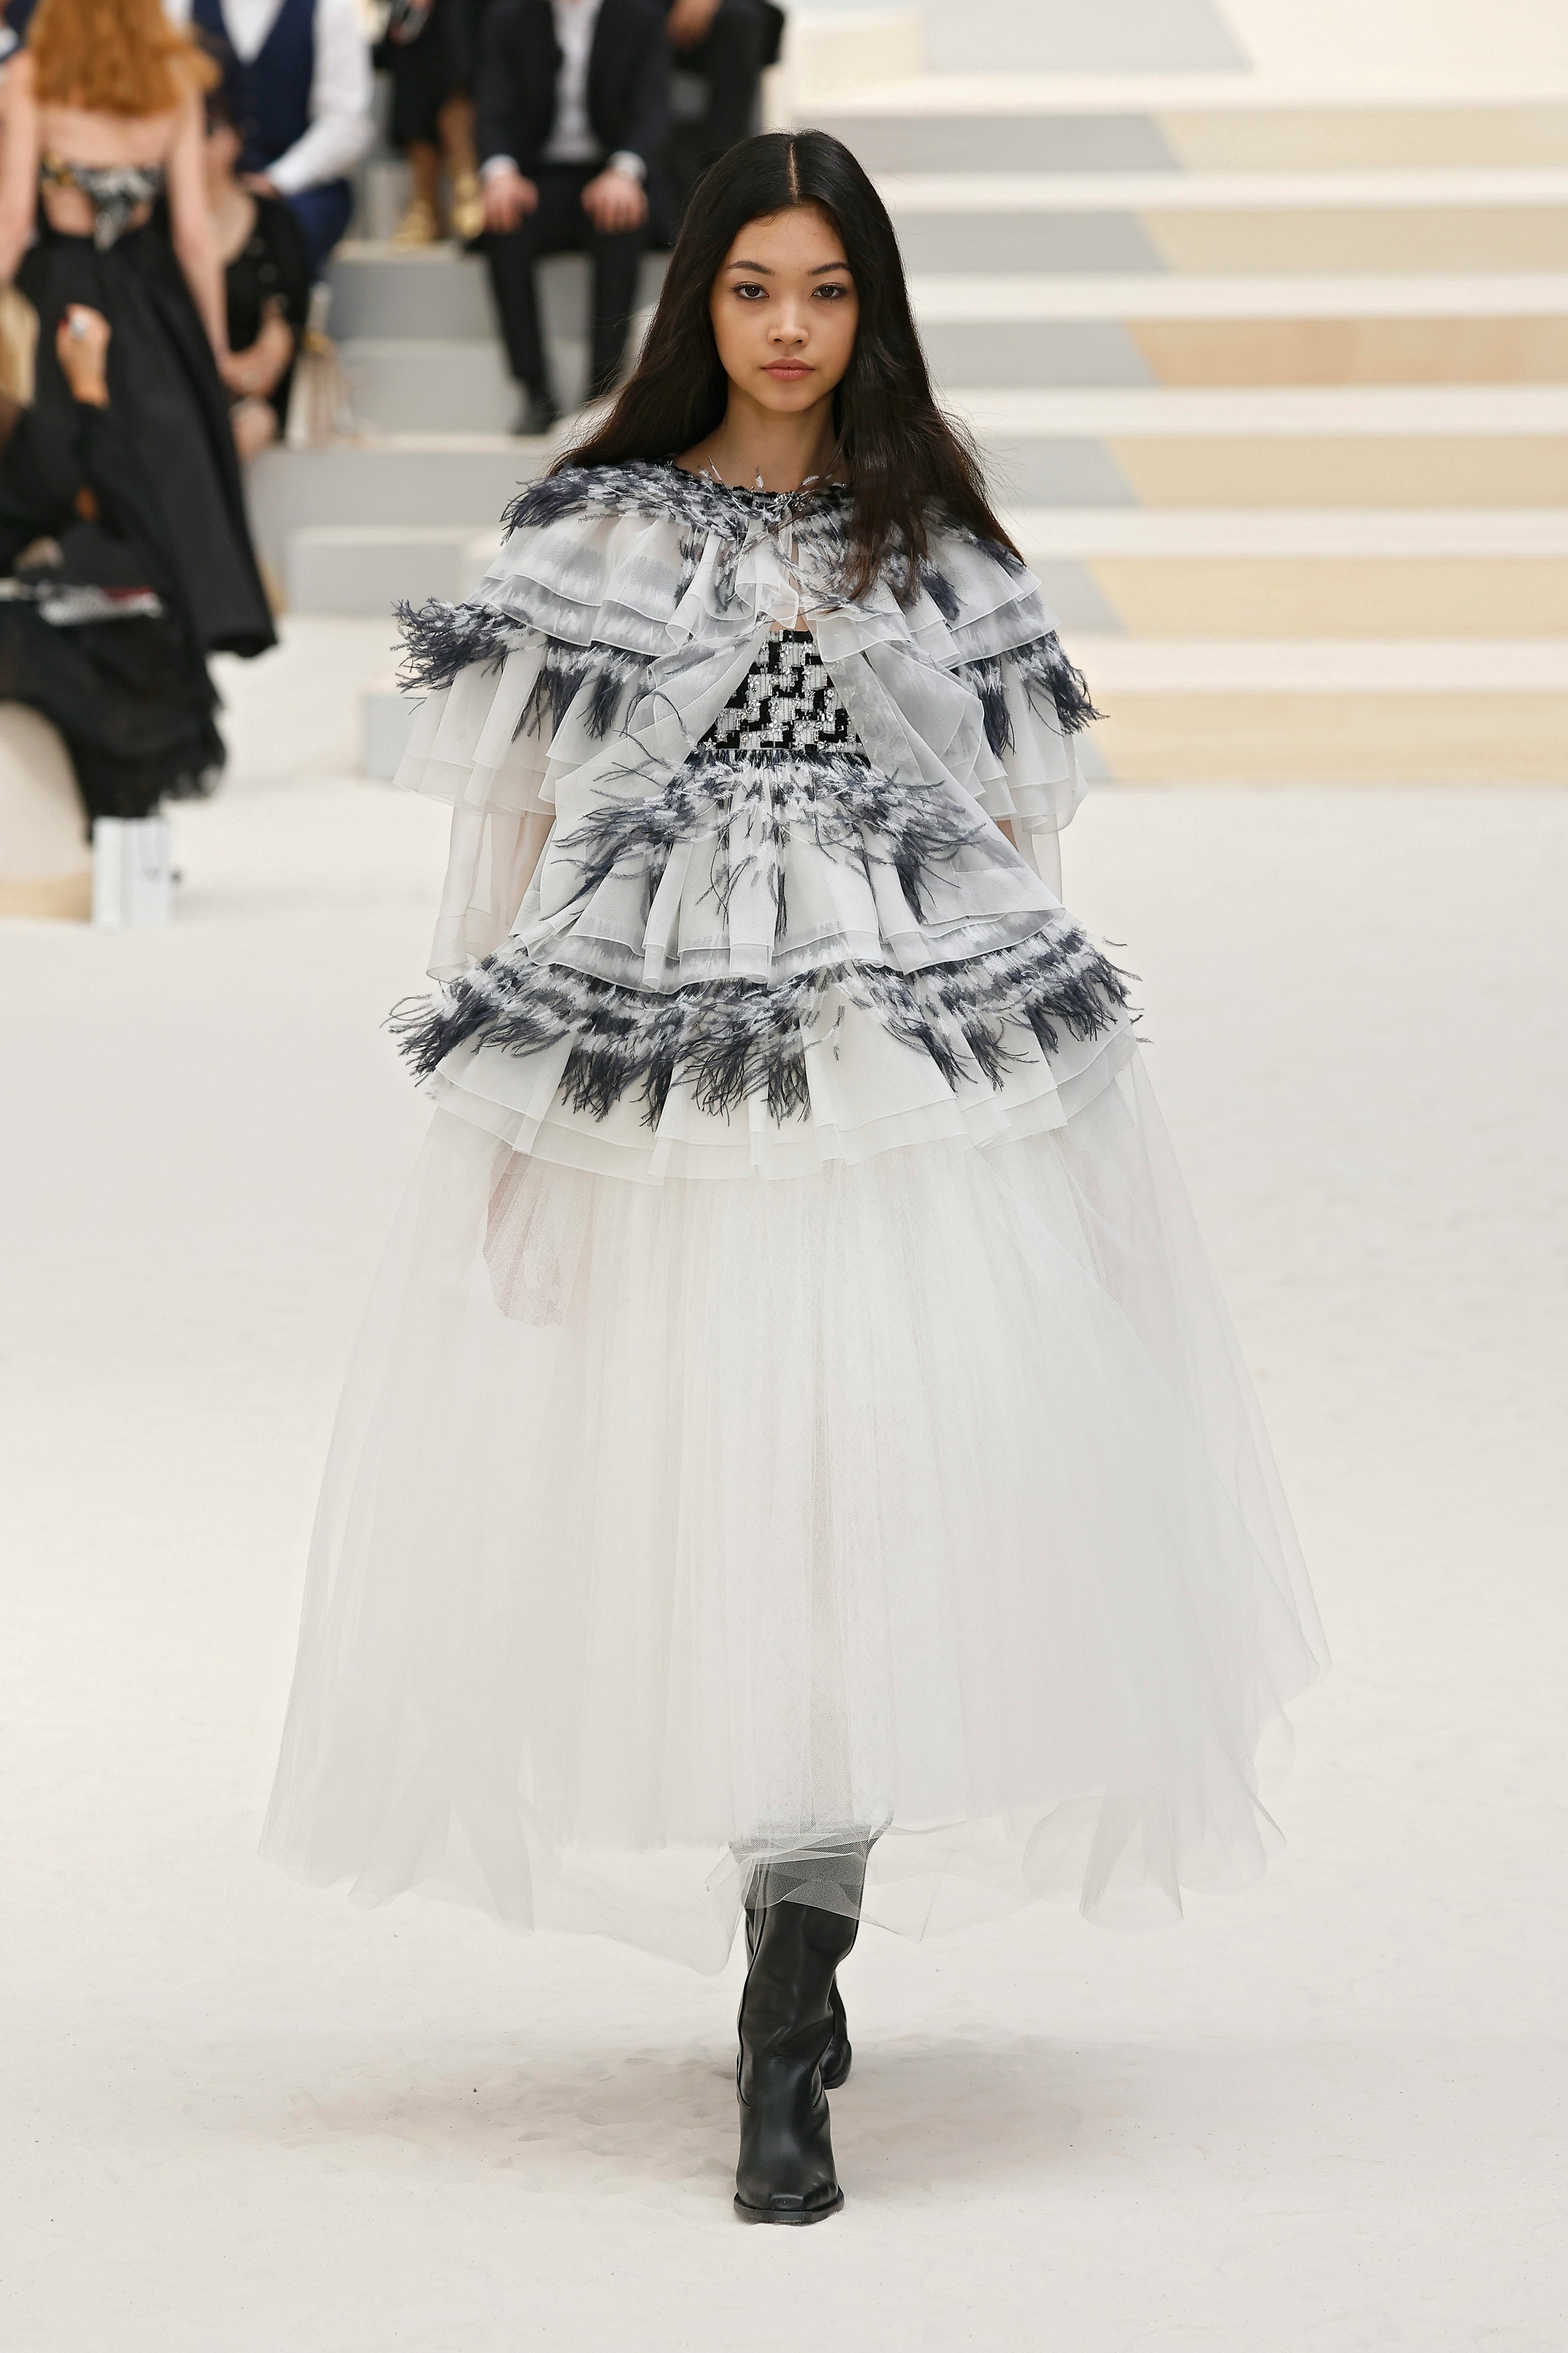 Chanel nods to sovereign style with its latest Paris Couture Week